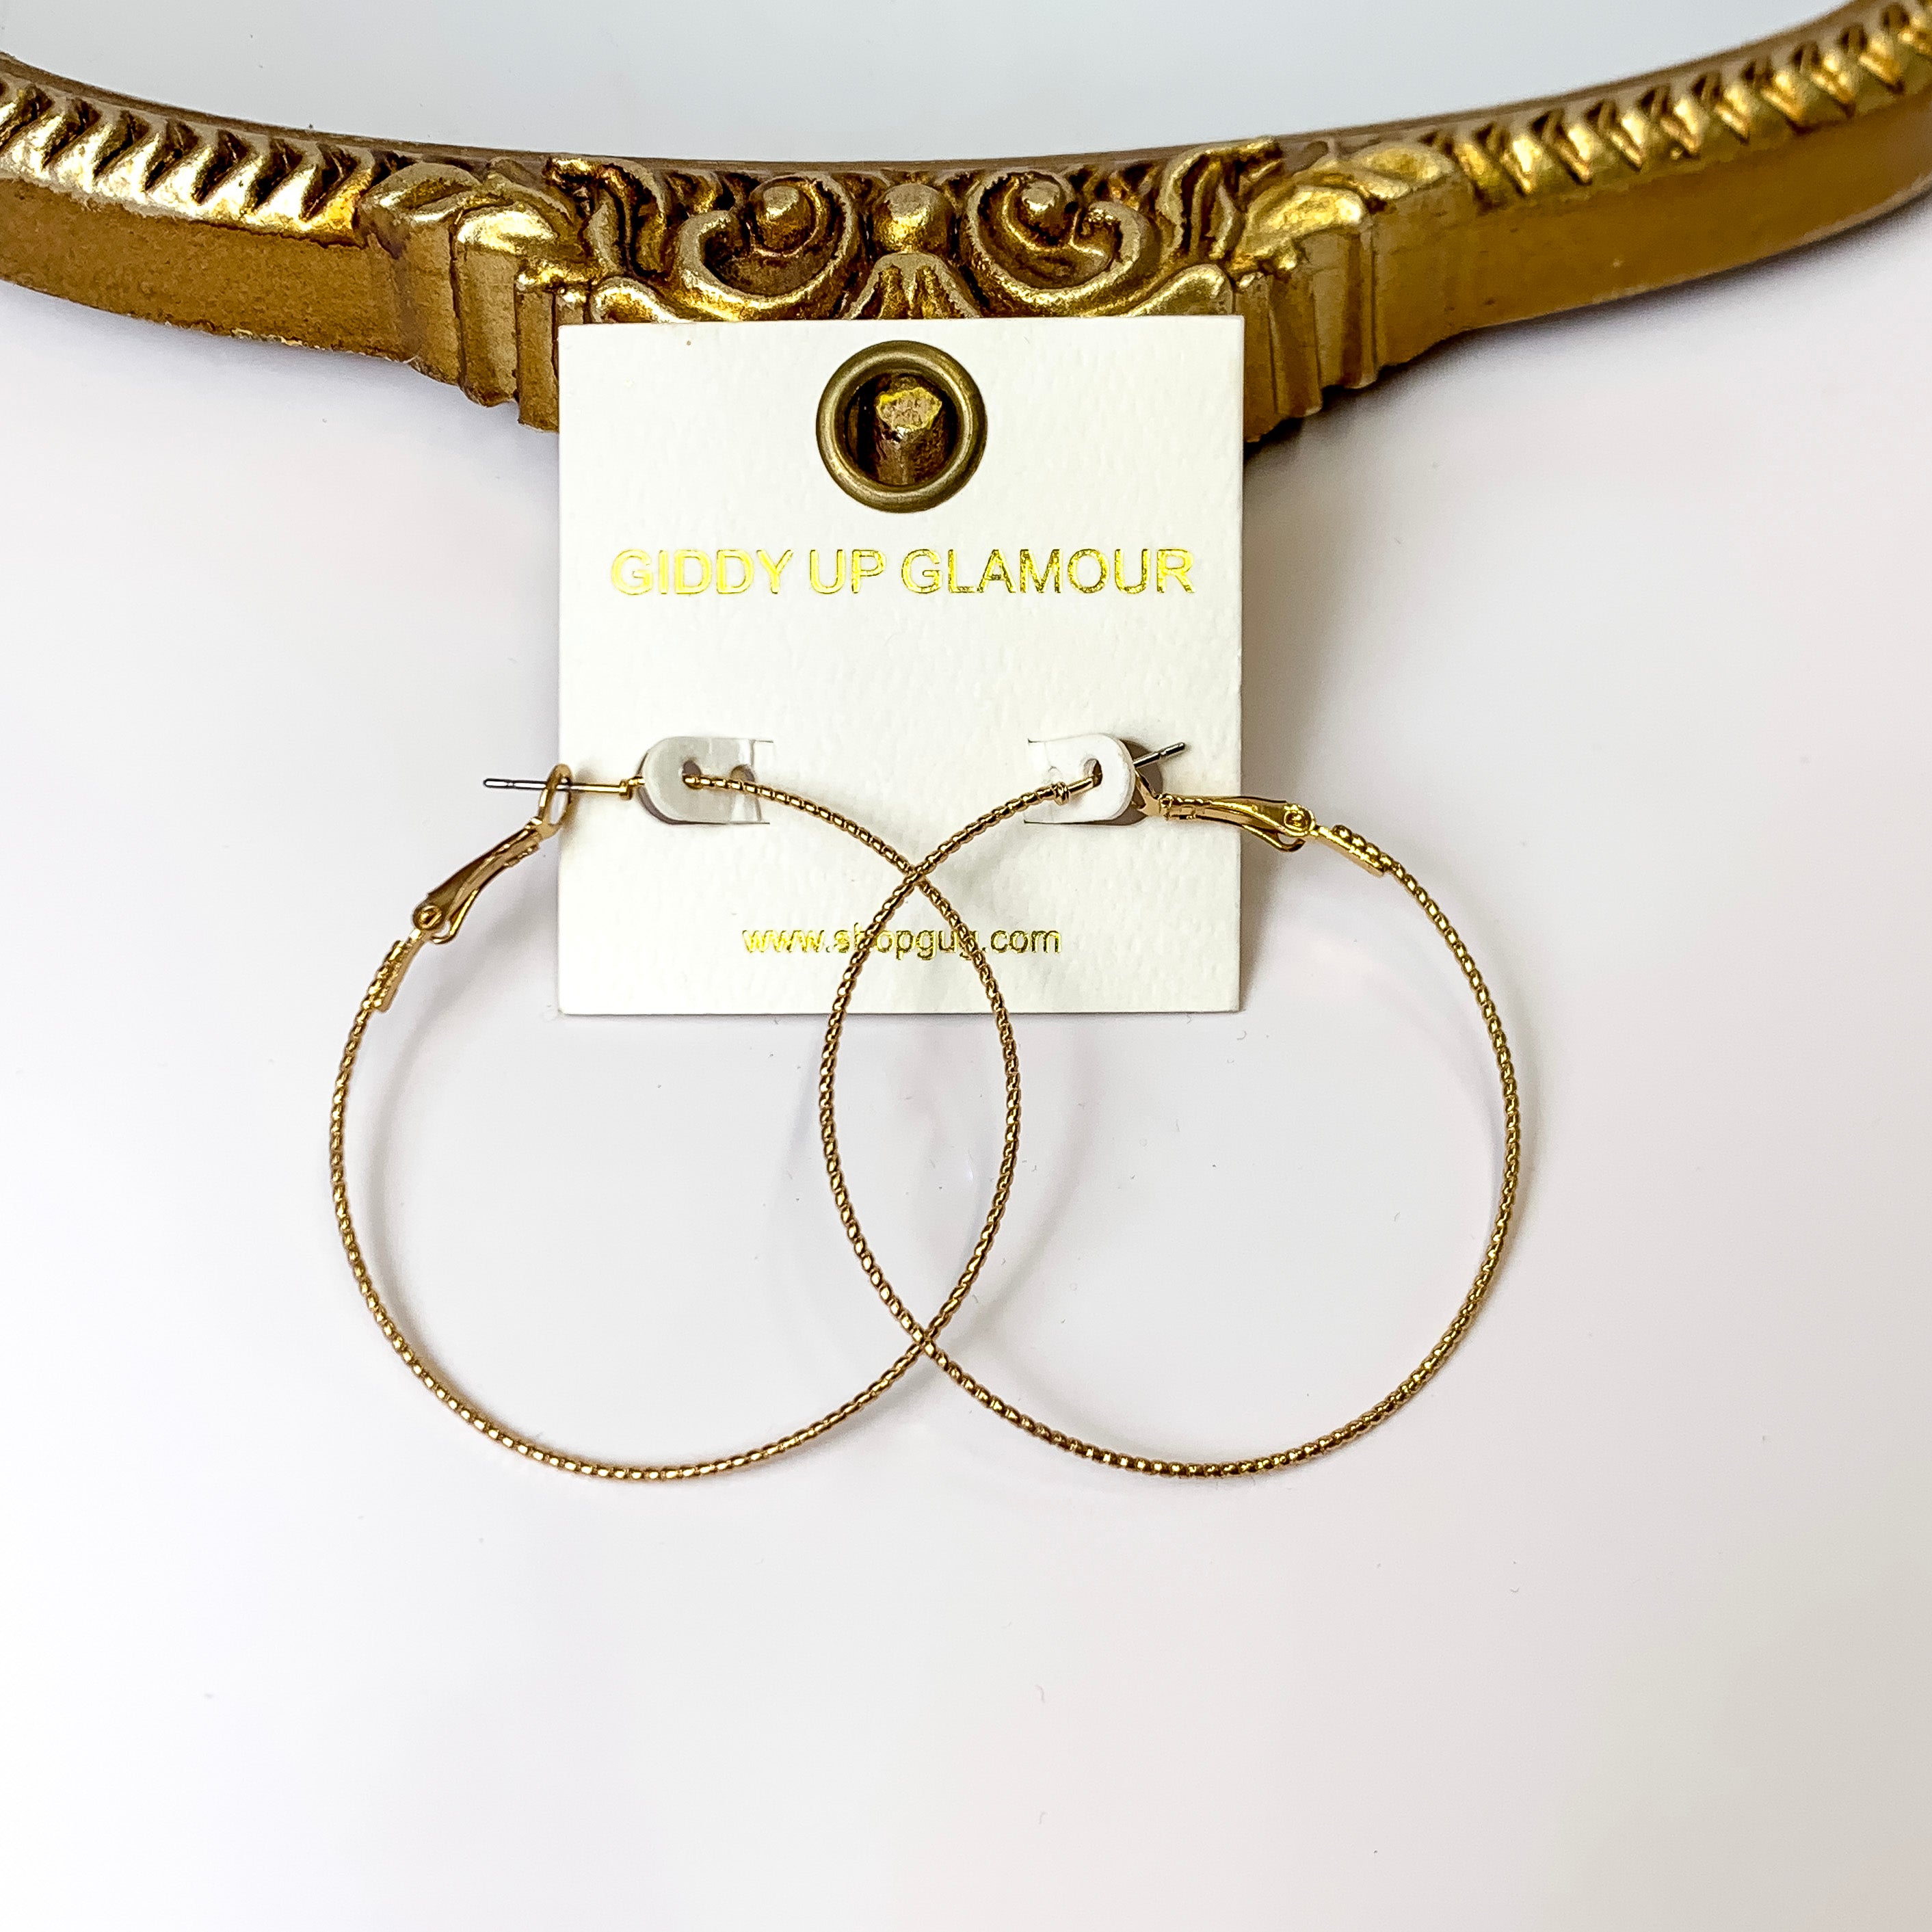 2 Inch Thin Wired Rope Textured Hoop Earrings in Gold - Giddy Up Glamour Boutique